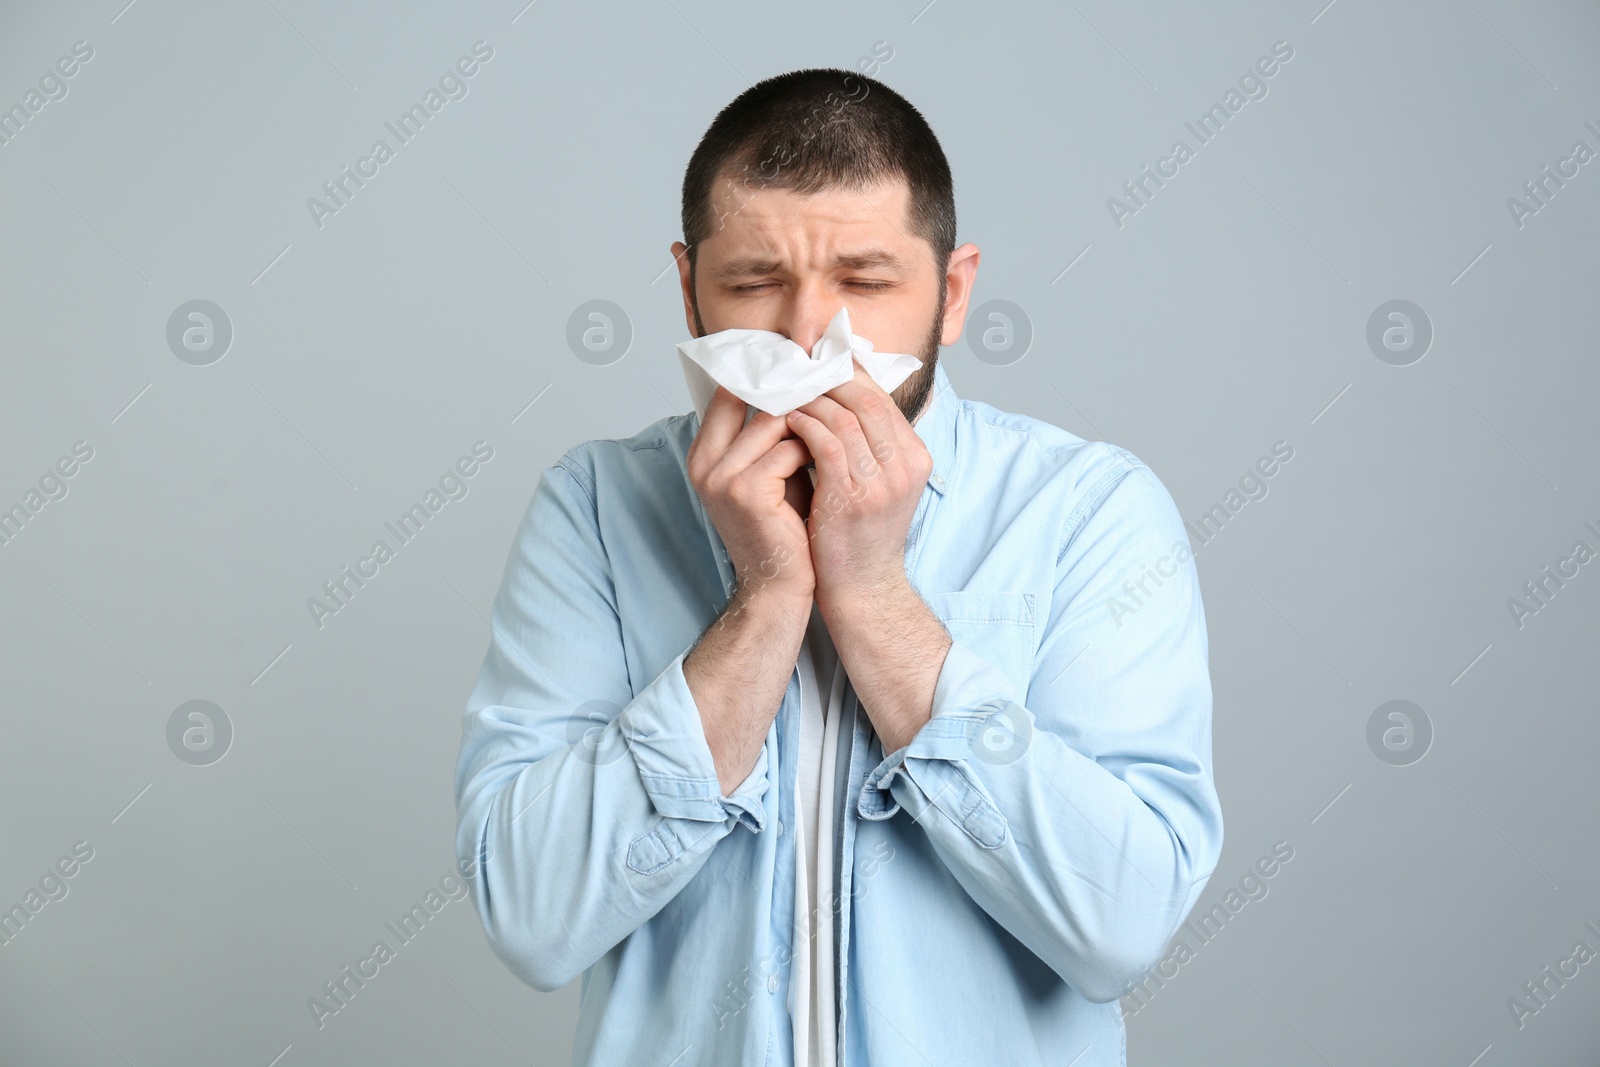 Photo of Man with tissue suffering from runny nose on light grey background